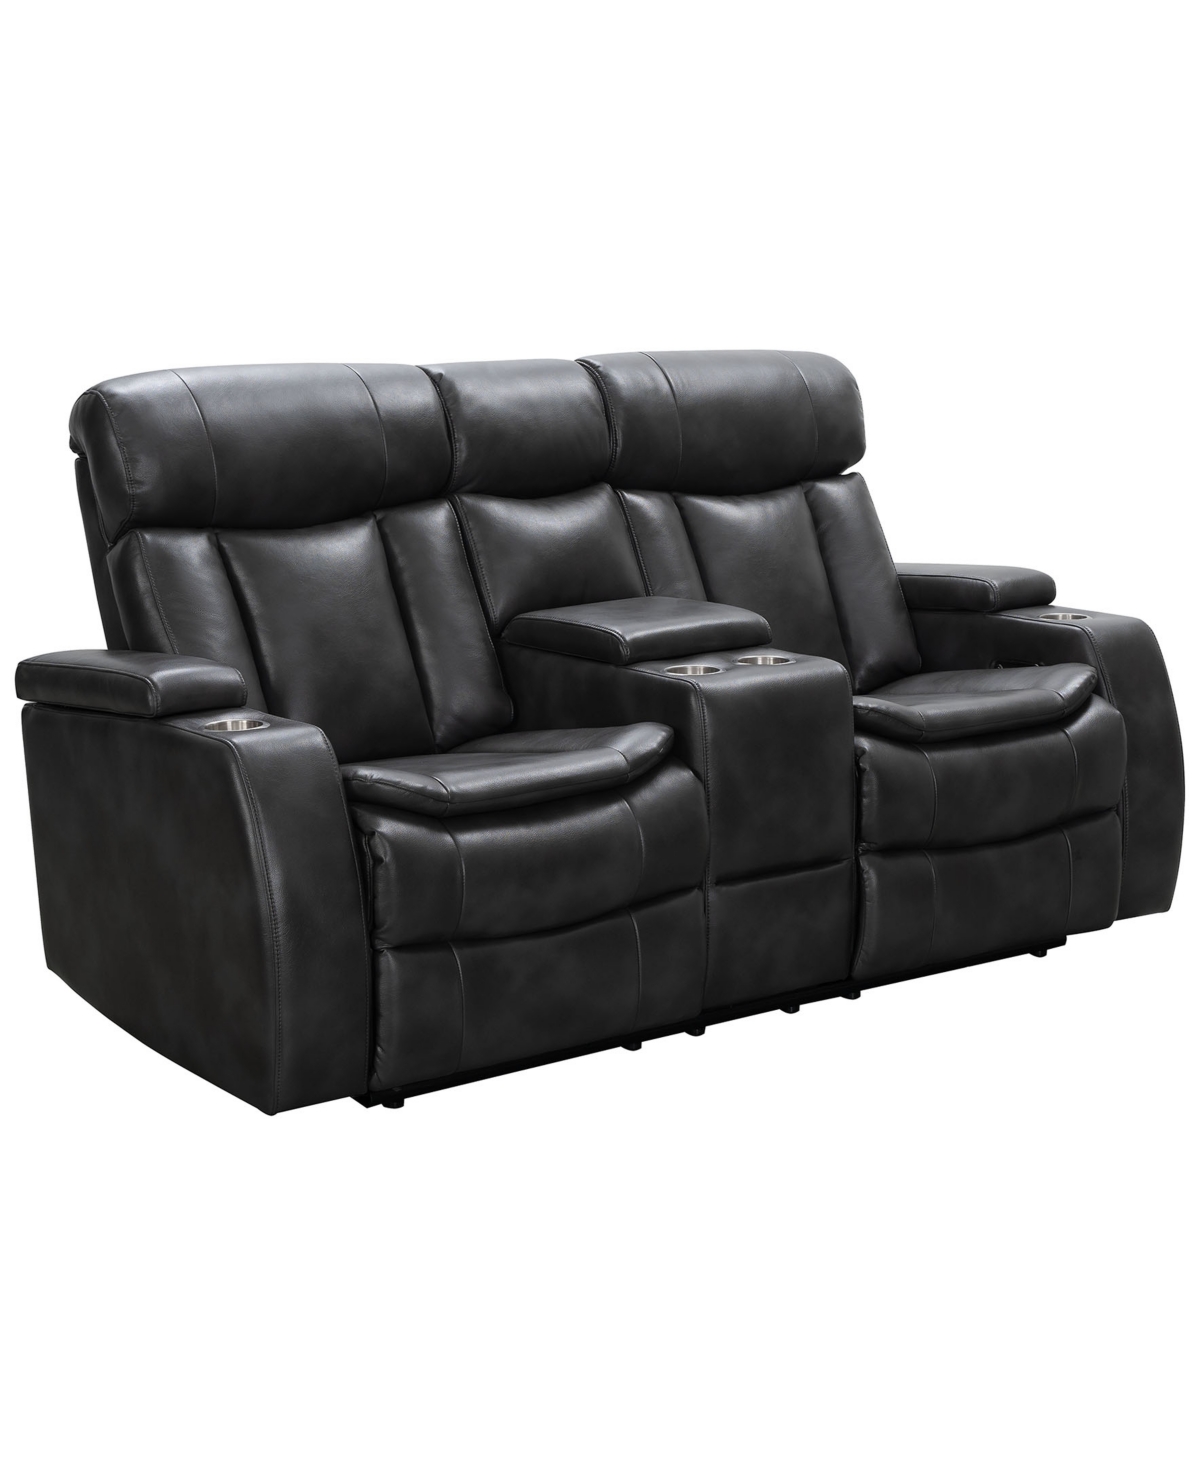 Abbyson Living Zackary 74" Leather Power Reclining Console Loveseat With Power Headrest In Black